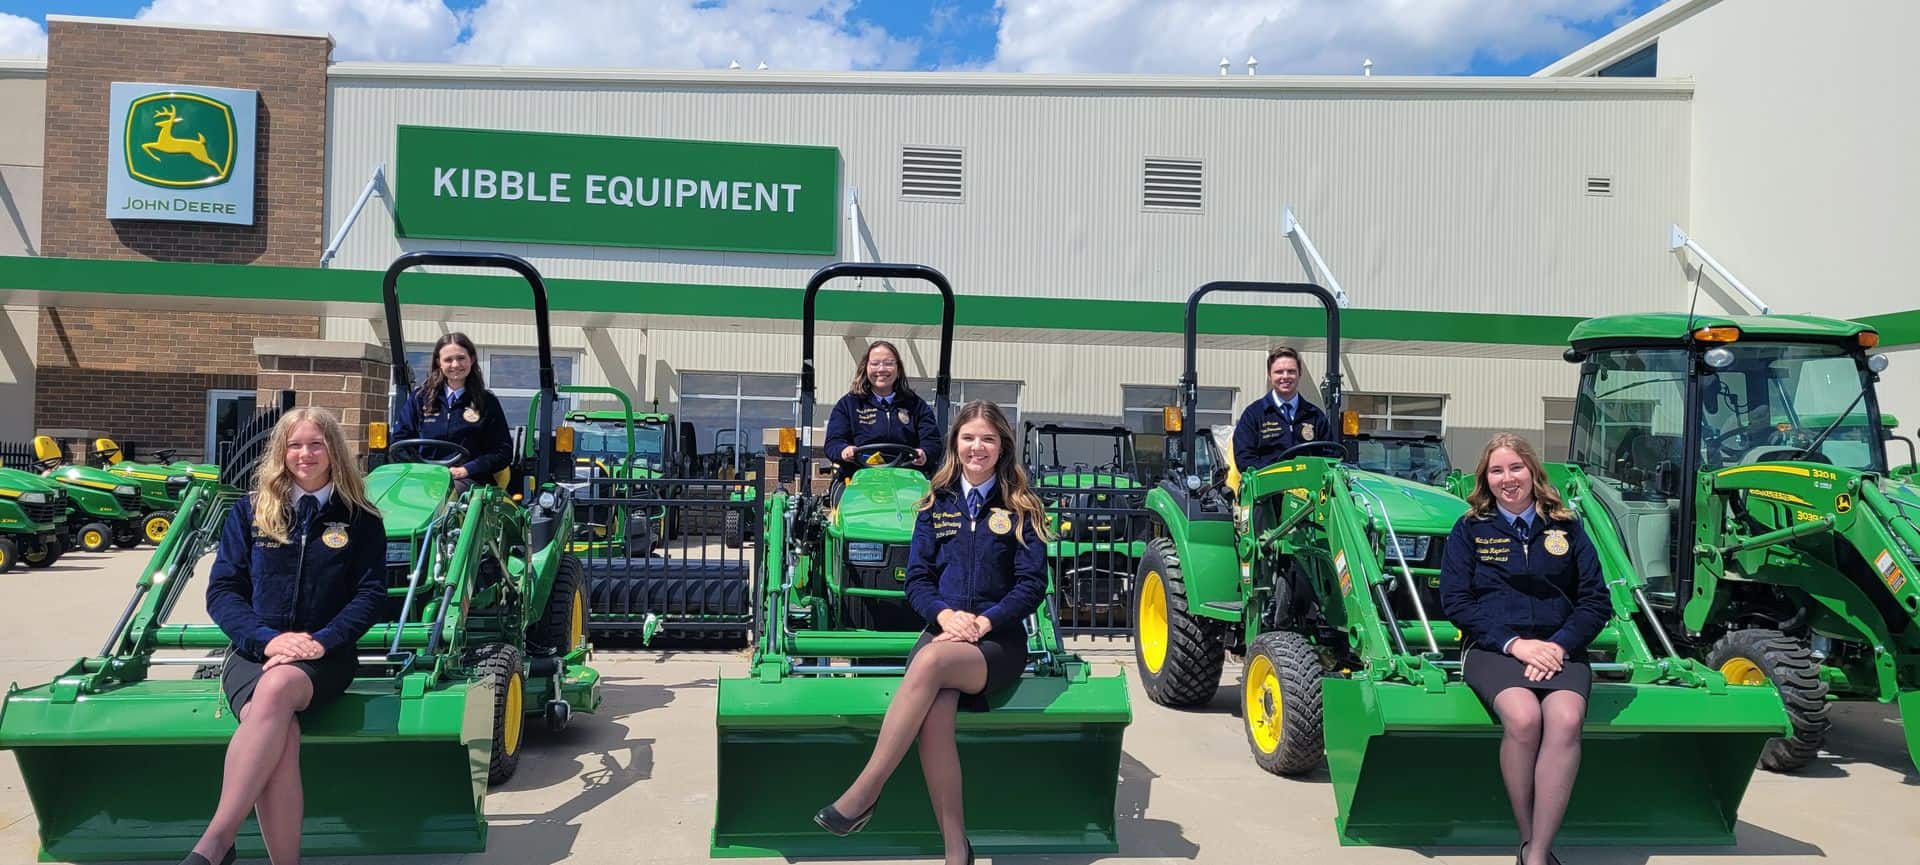 MN FFA Foundation State Officers sitting on equipment in front of Kibble Equipment